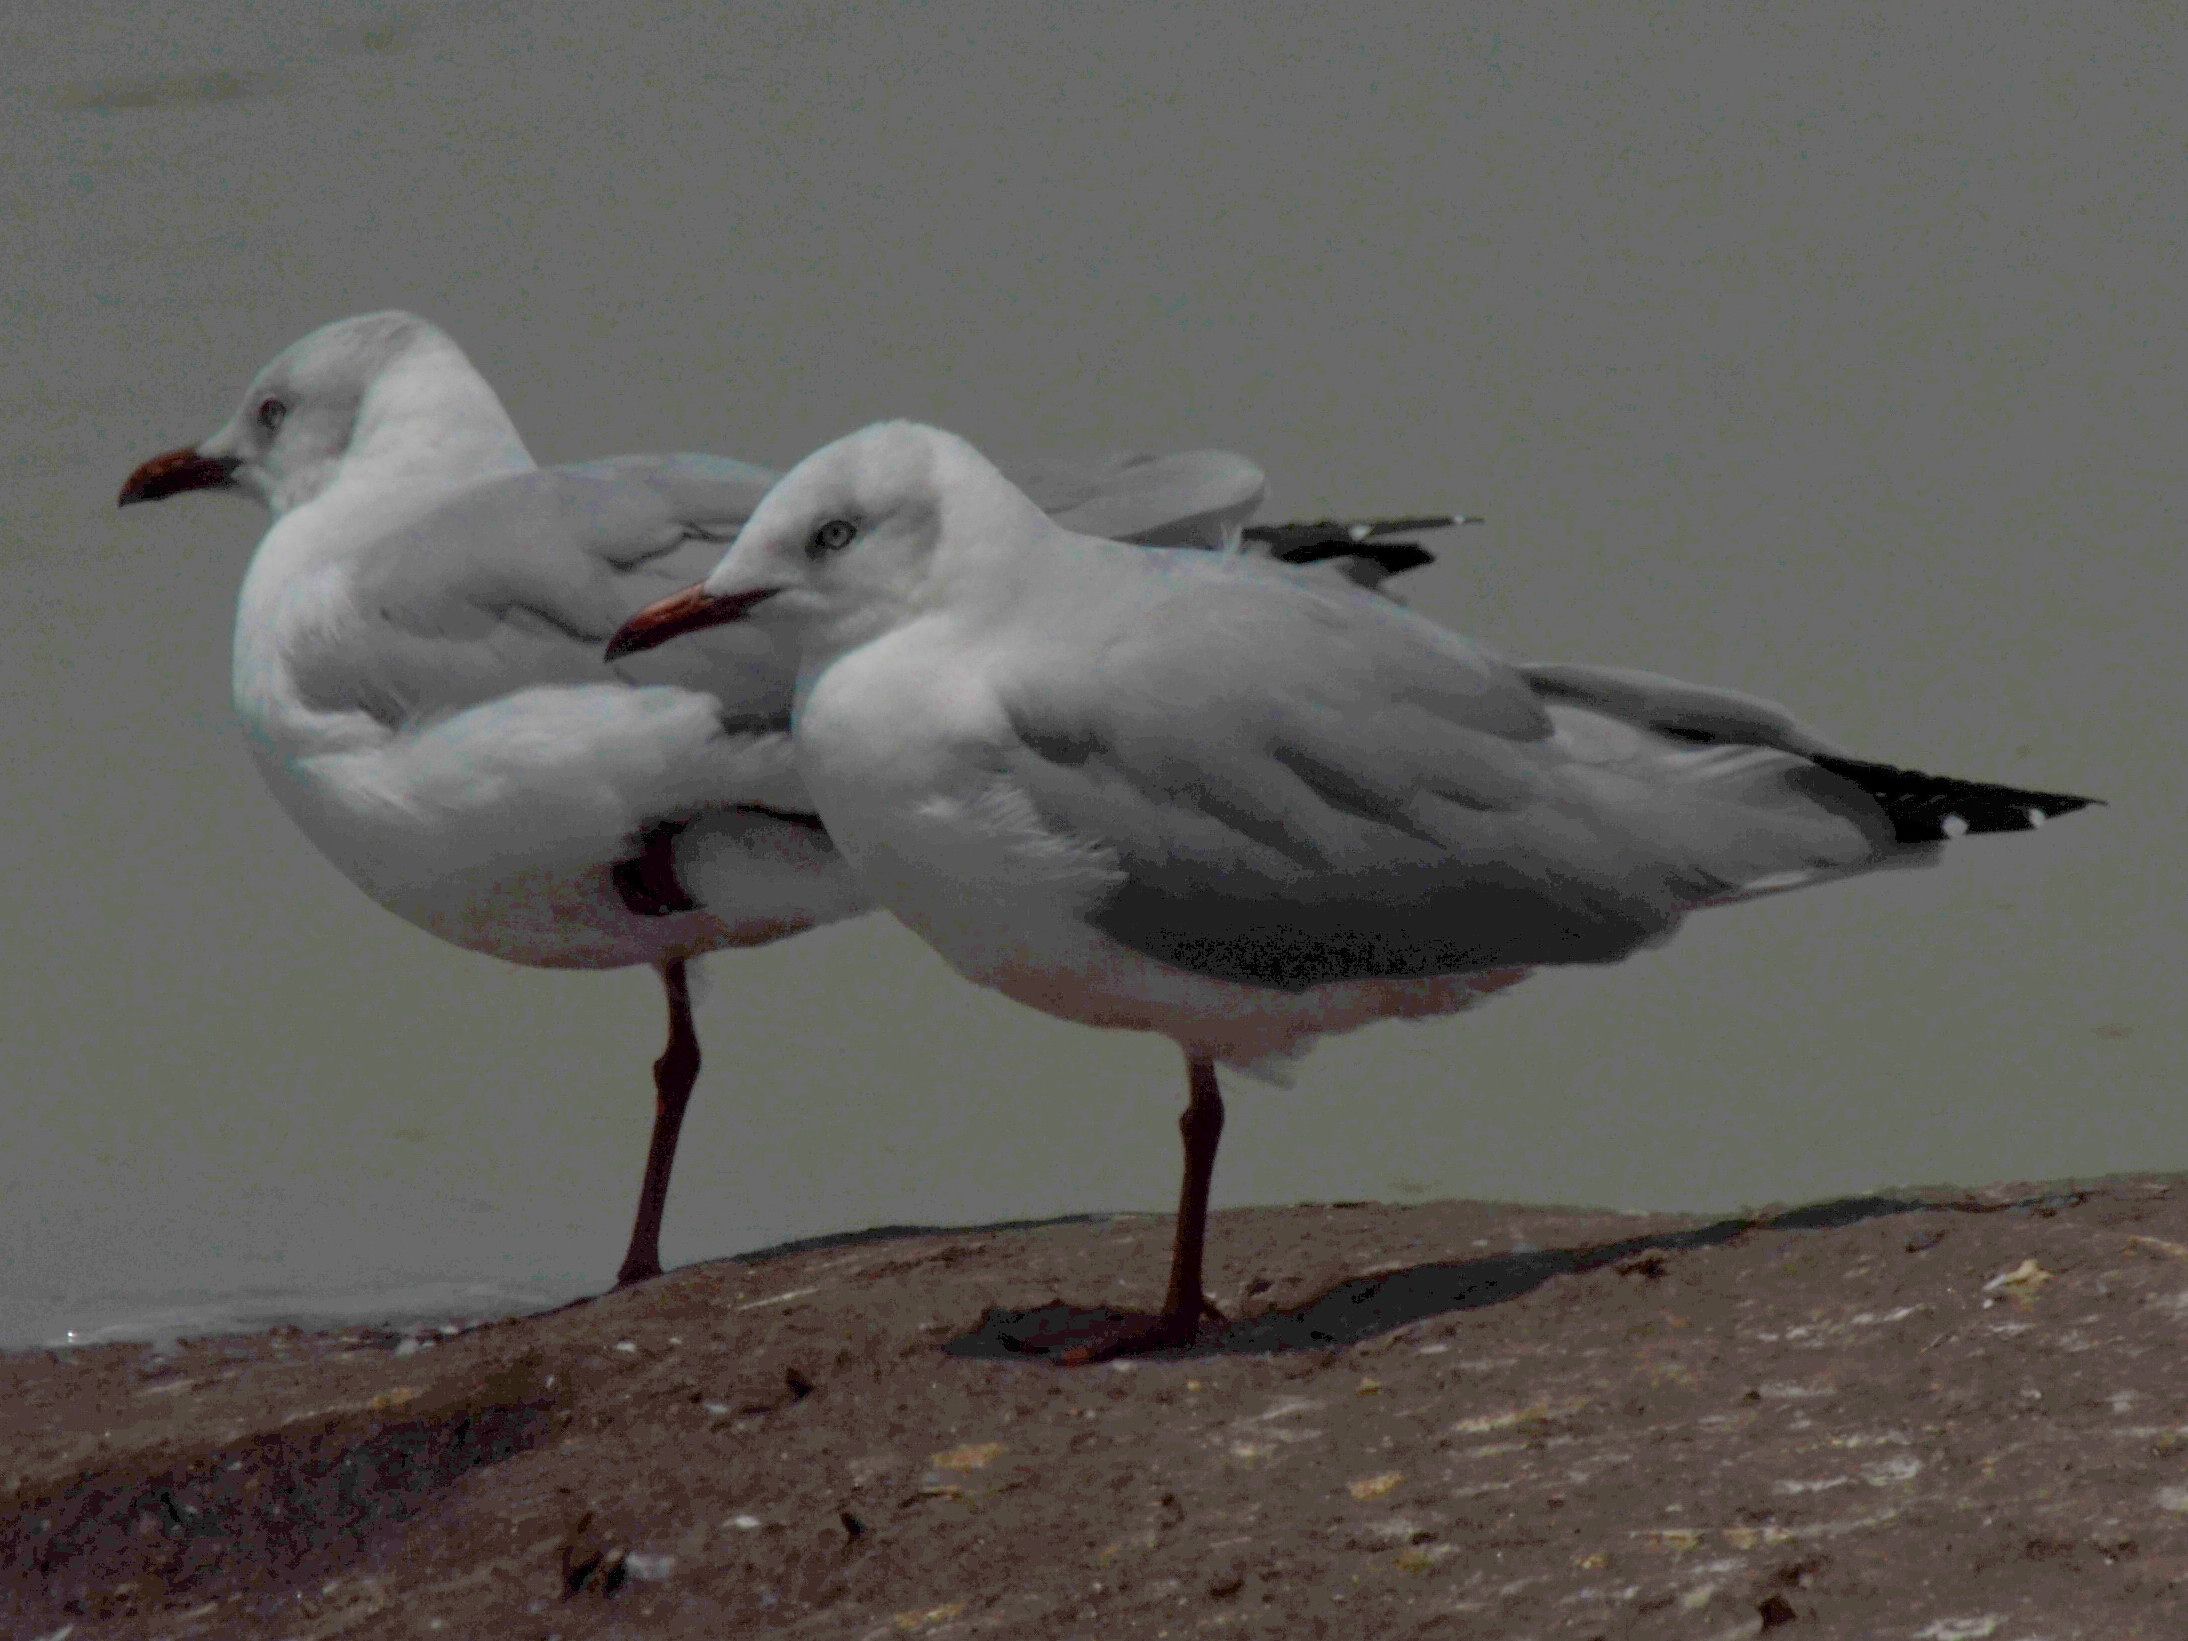 Click picture to see more Gray-hooded (headed) Gulls.